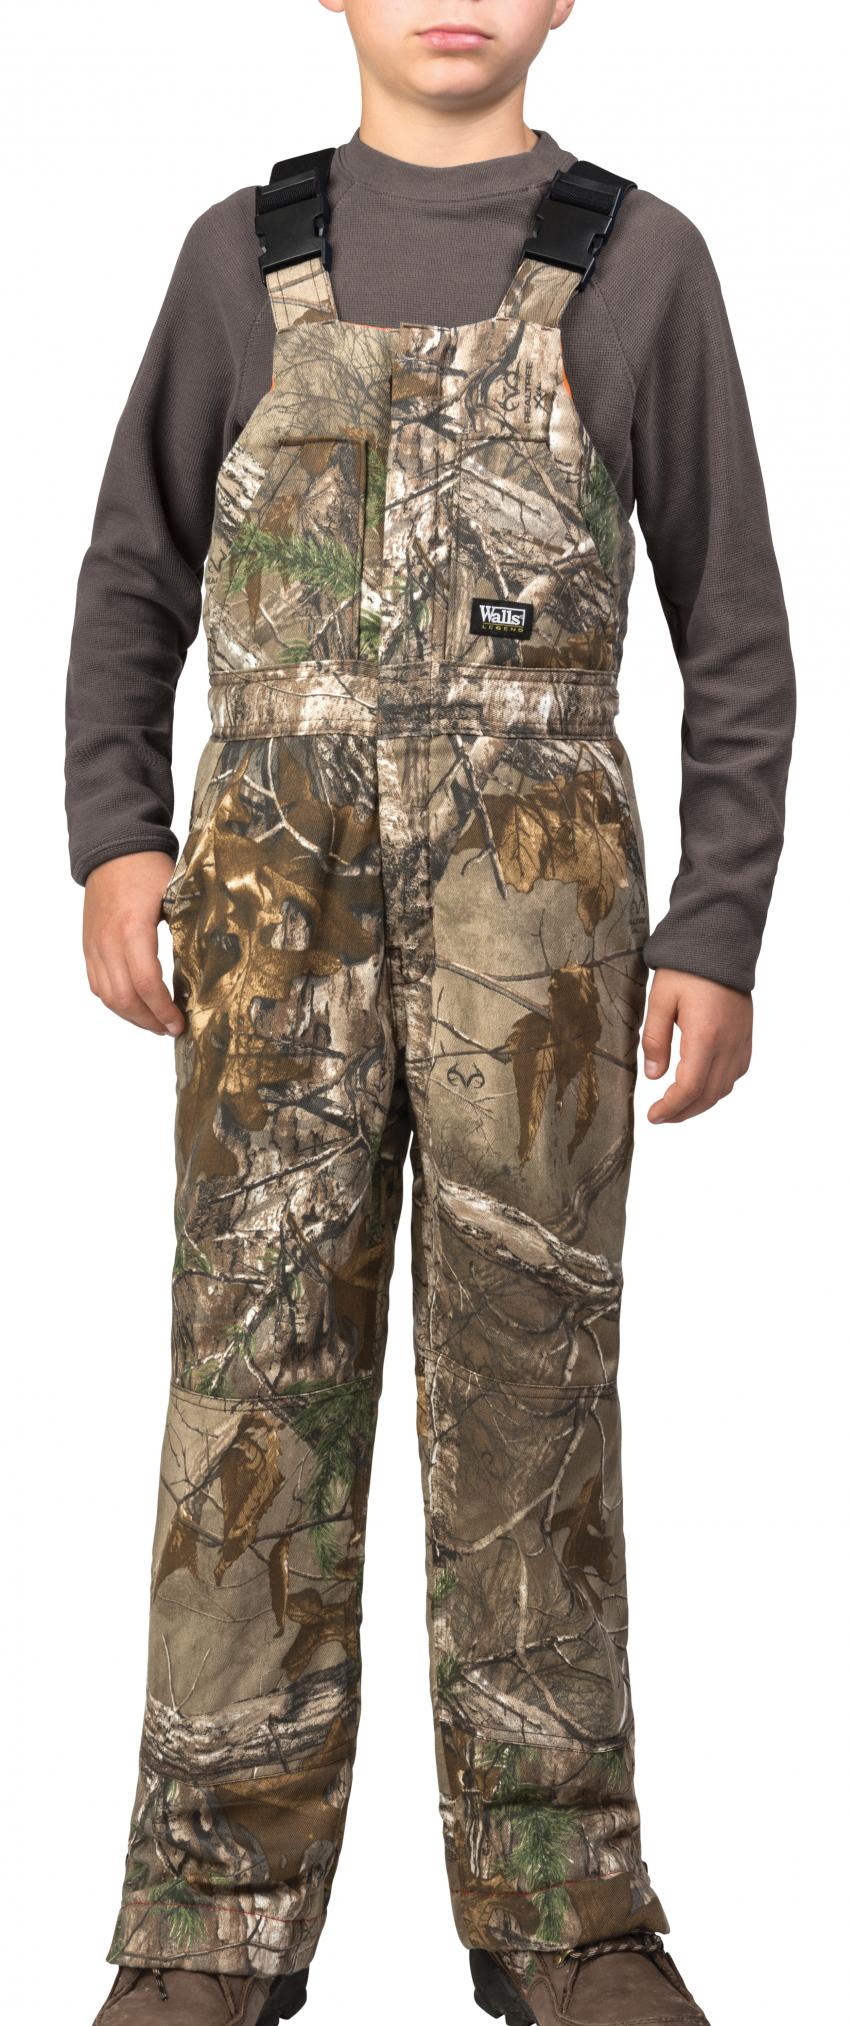 New Realtree Youth Hunting Apparel in 2016 | Insulated Bib 